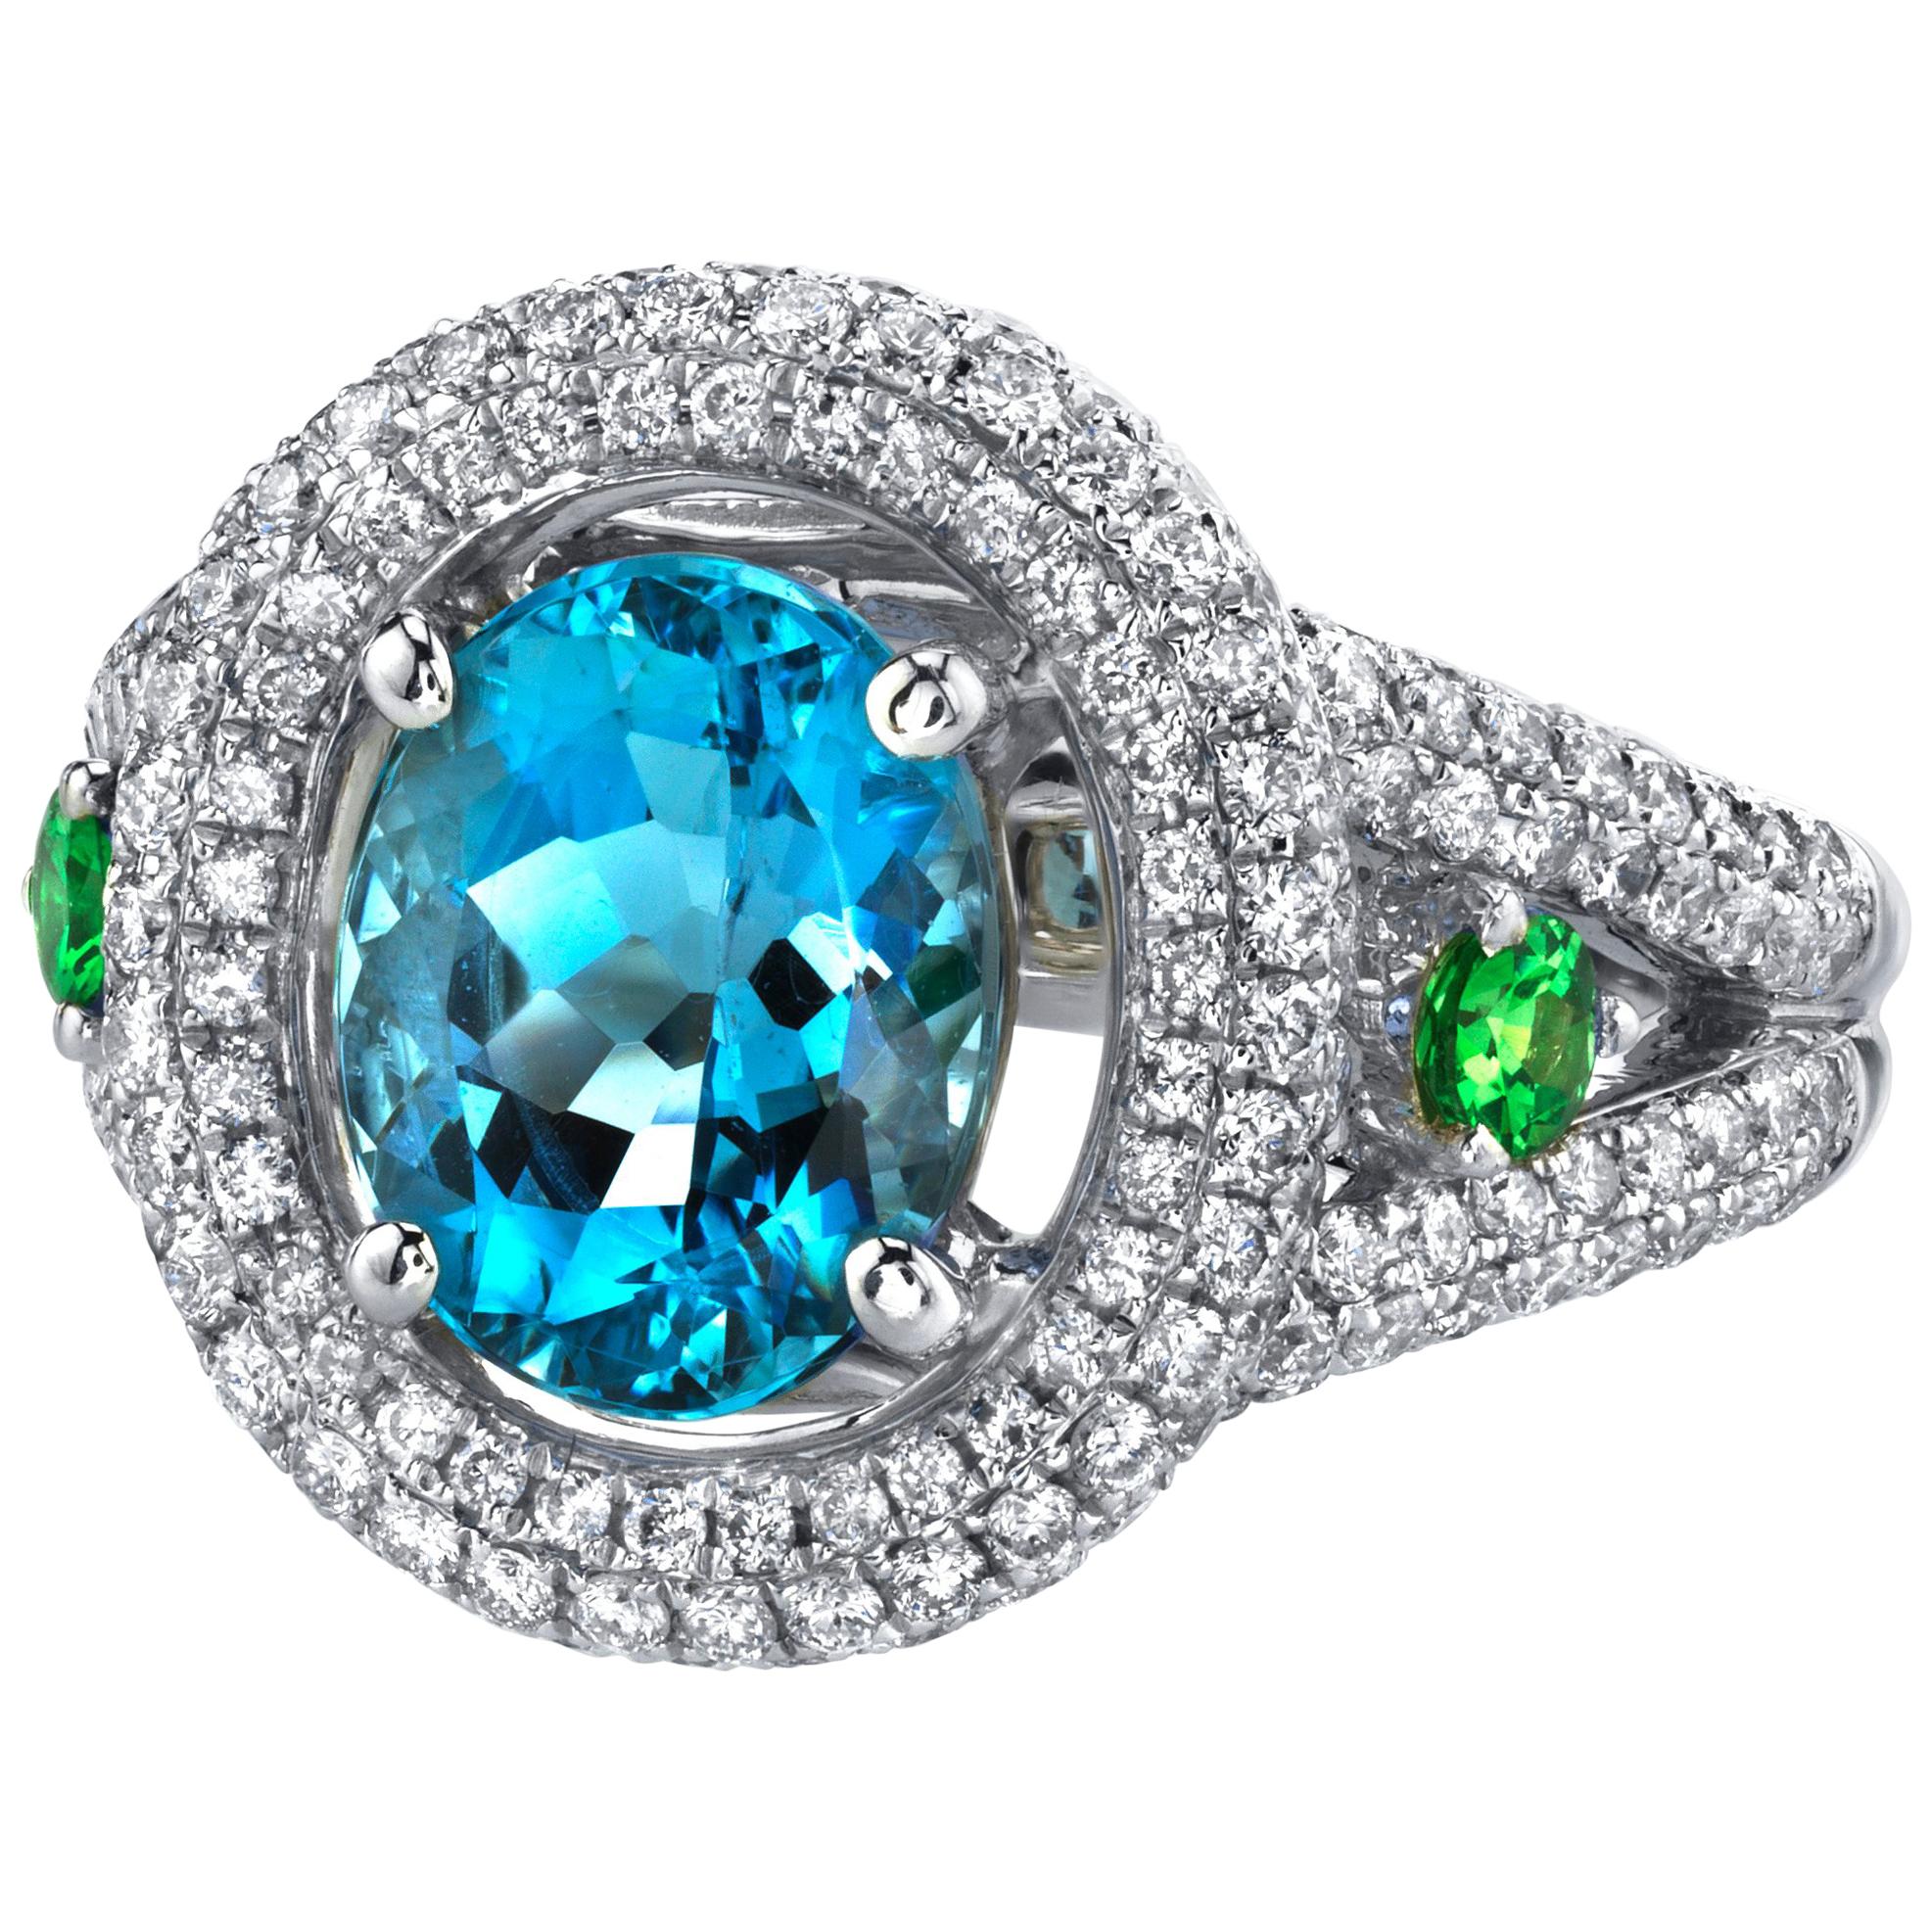 This elegant cocktail ring features a gem-quality aquamarine oval surrounded by a double diamond halo and accented with bright tsavorite garnets set in 18k white gold. The center aquamarine is an unusually fine gem with extraordinary deep blue color